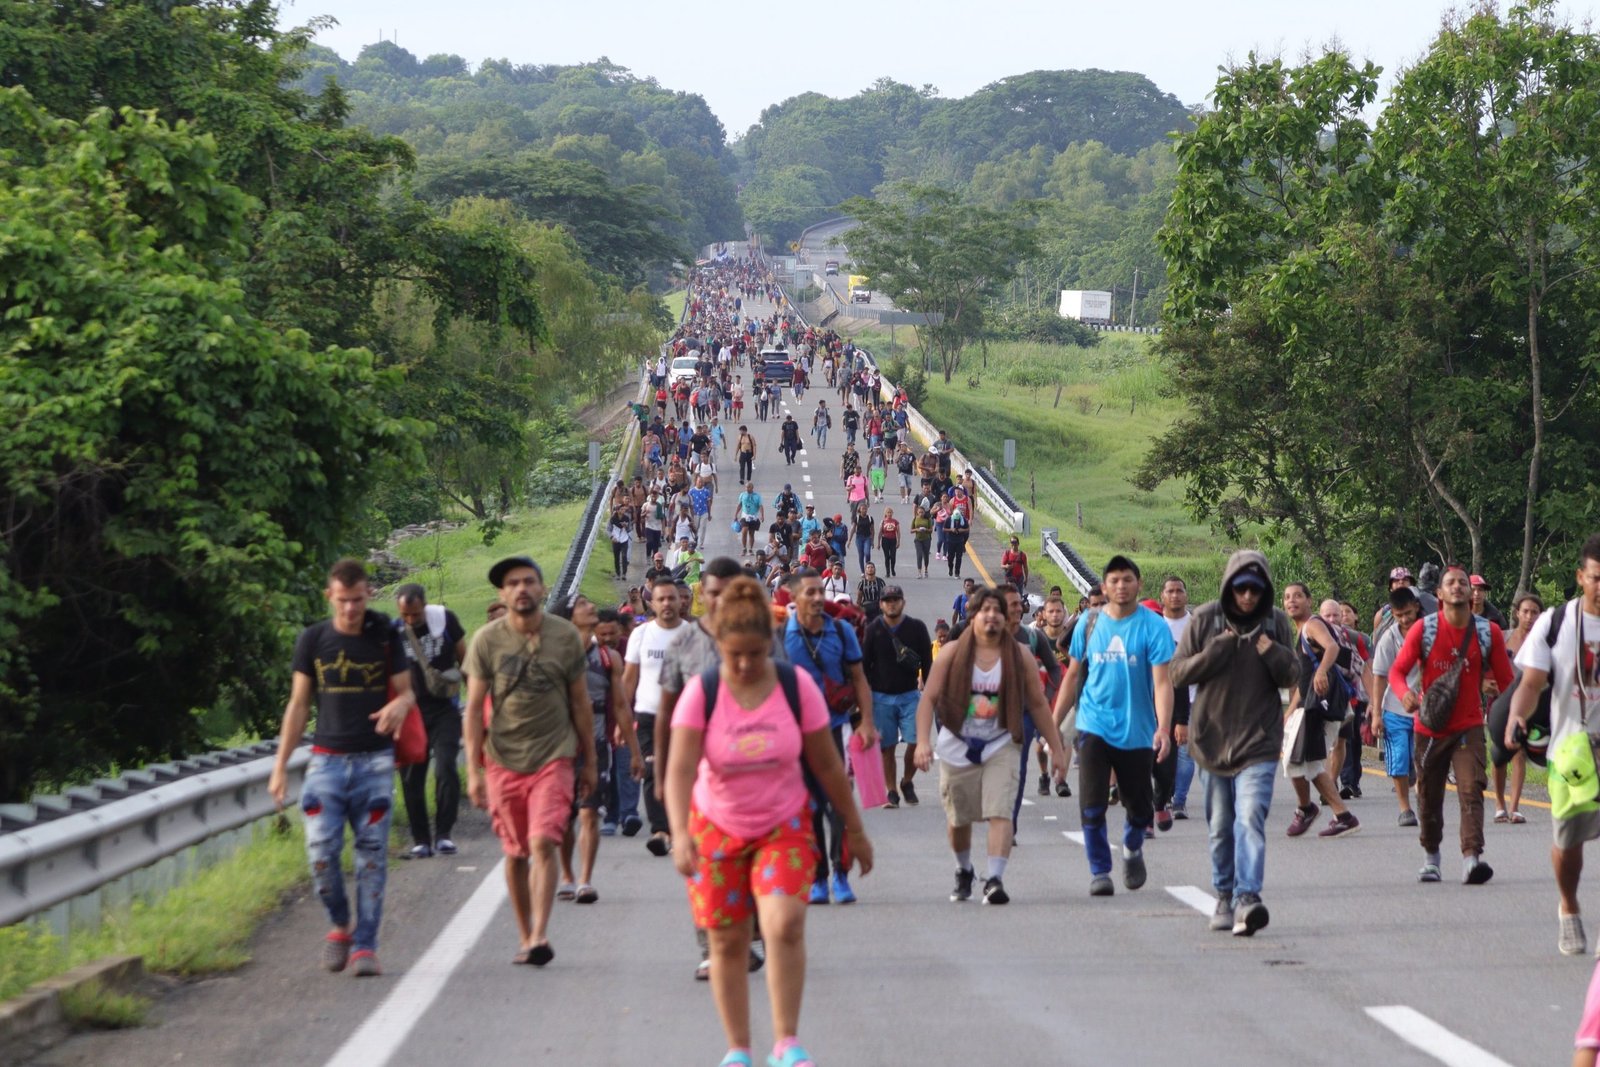 “Caravan of 15 thousand is divided on its route to Escuintla”